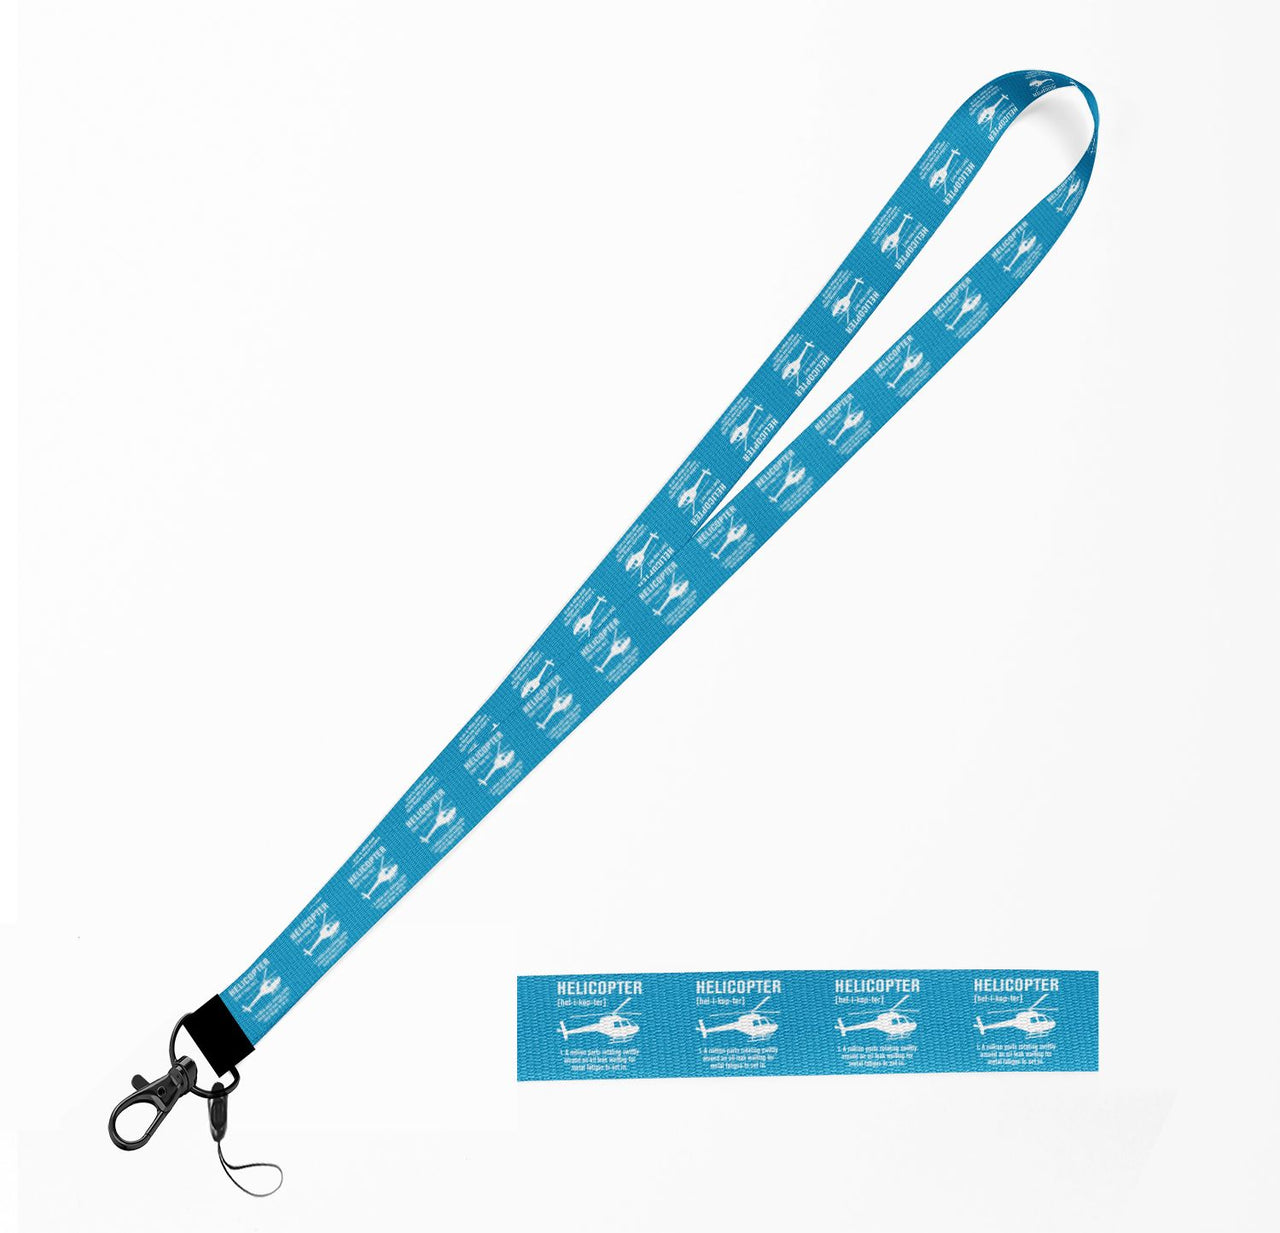 Helicopter [Noun] Designed Lanyard & ID Holders